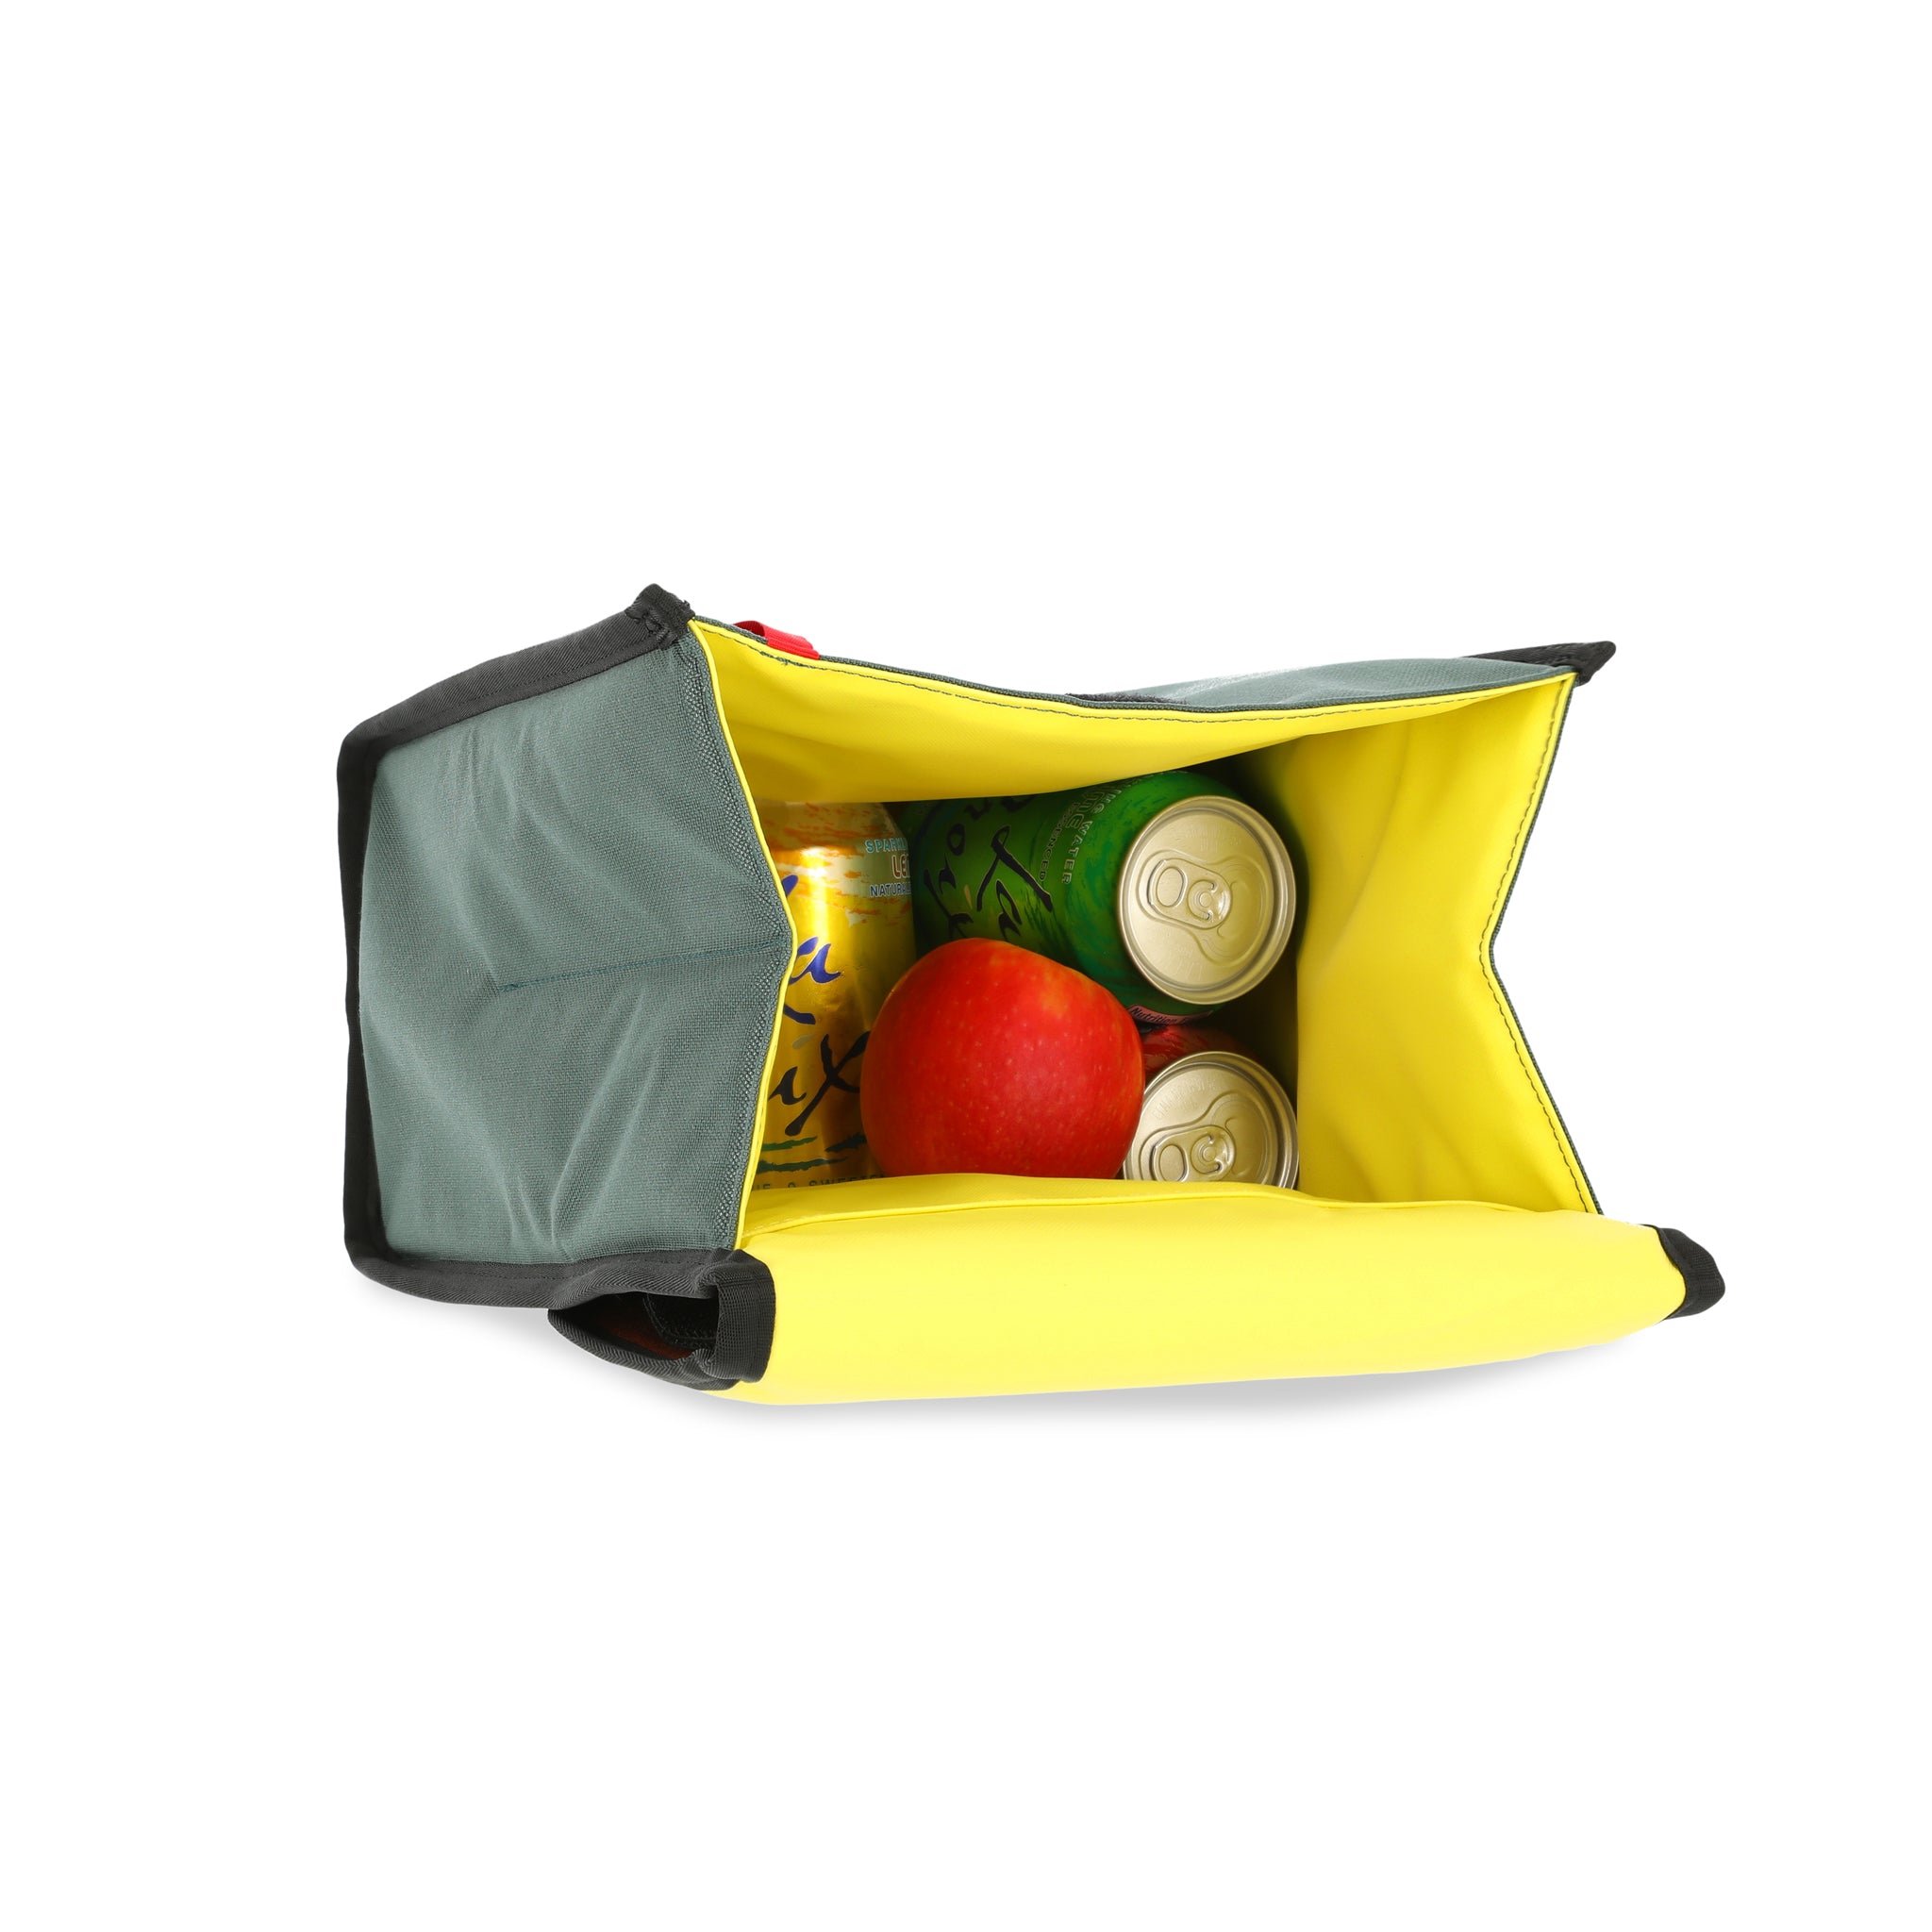 Troika Waterproof 10 Liter Cooling Bag for Outdoor Adventures | Troikaus.com